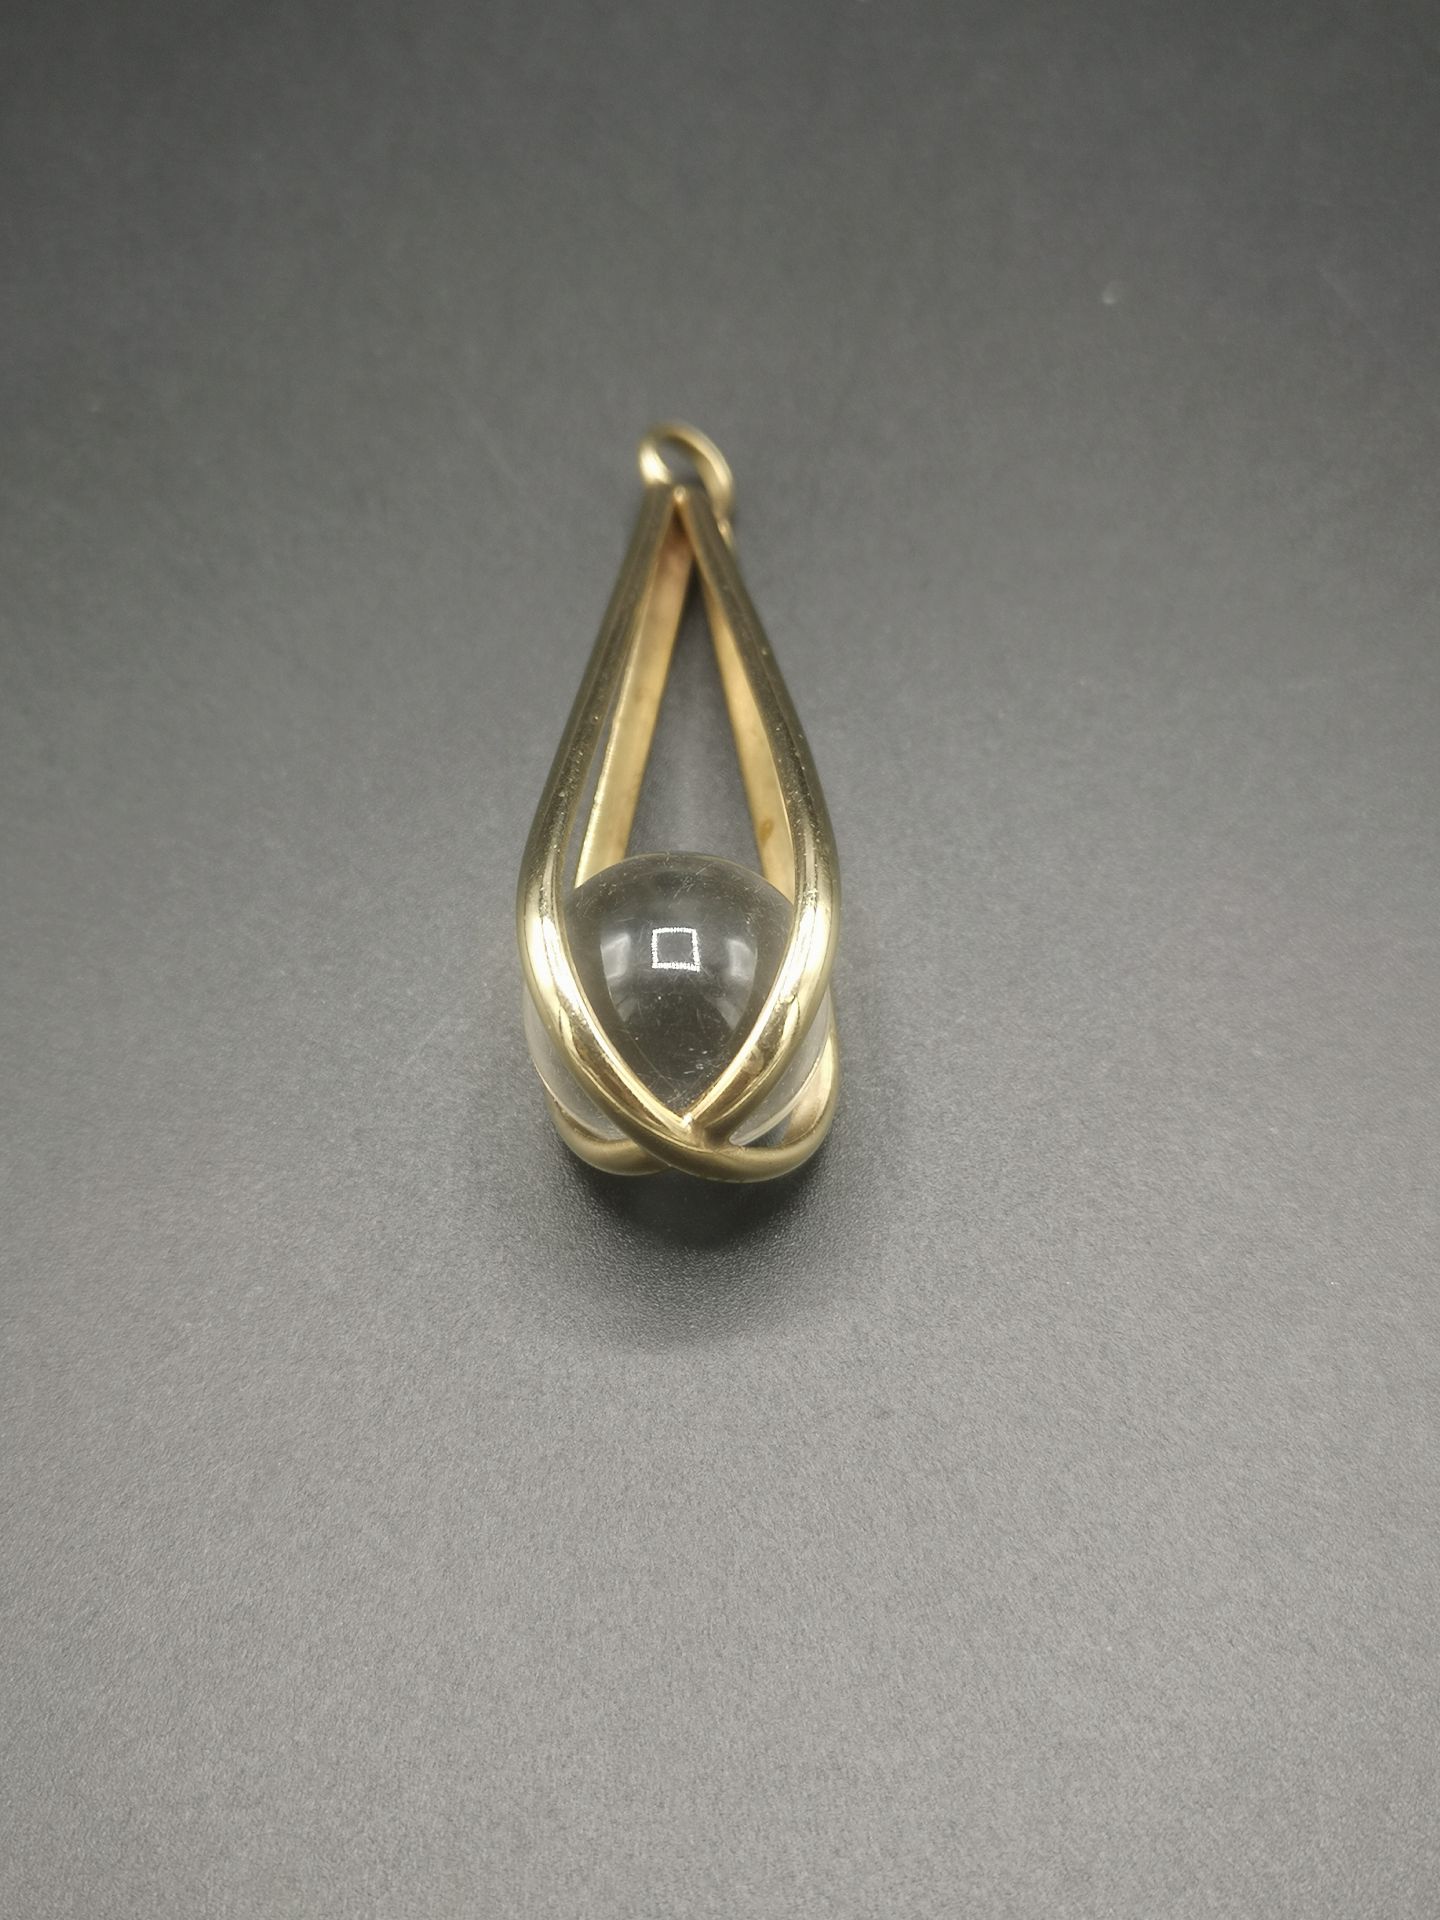 9ct gold pendant - Image 4 of 5